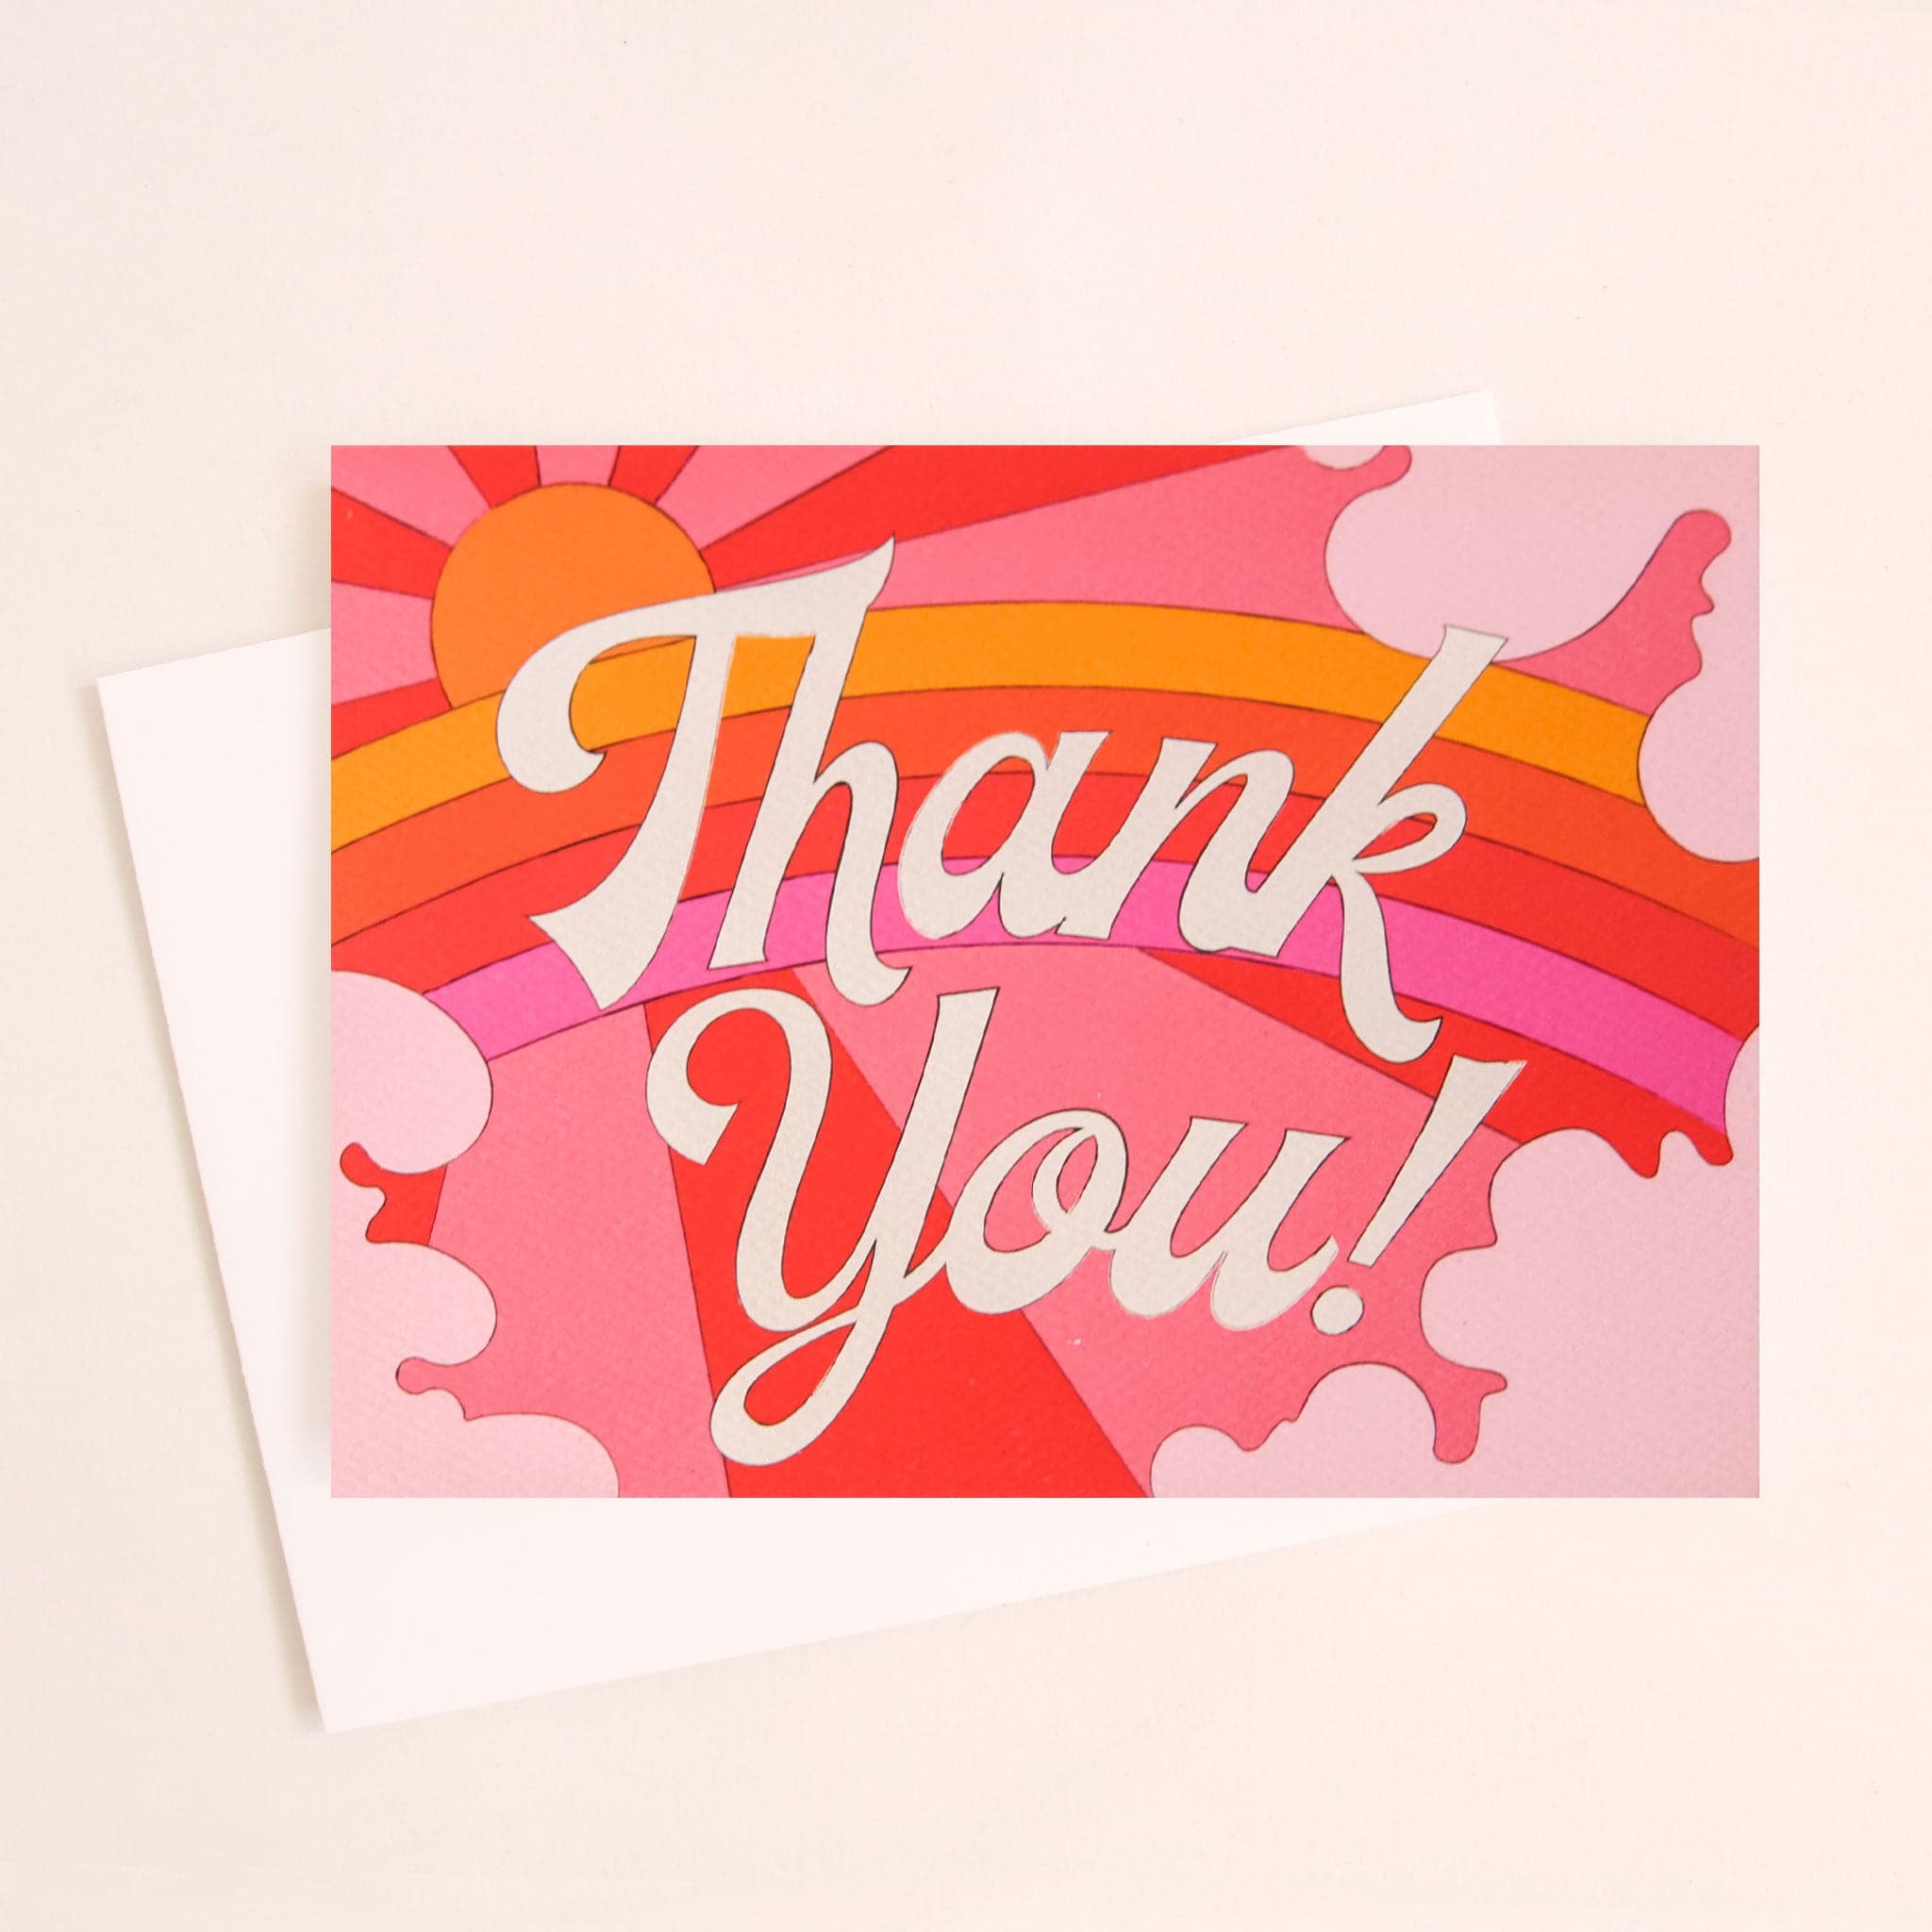 Card with a vibrant scene of a rosie toned rainbow and beaming pink and red sun. Soft pink cloud take up the edges. The center of the card reads &#39;Thank you!&#39; in white cursive lettering.